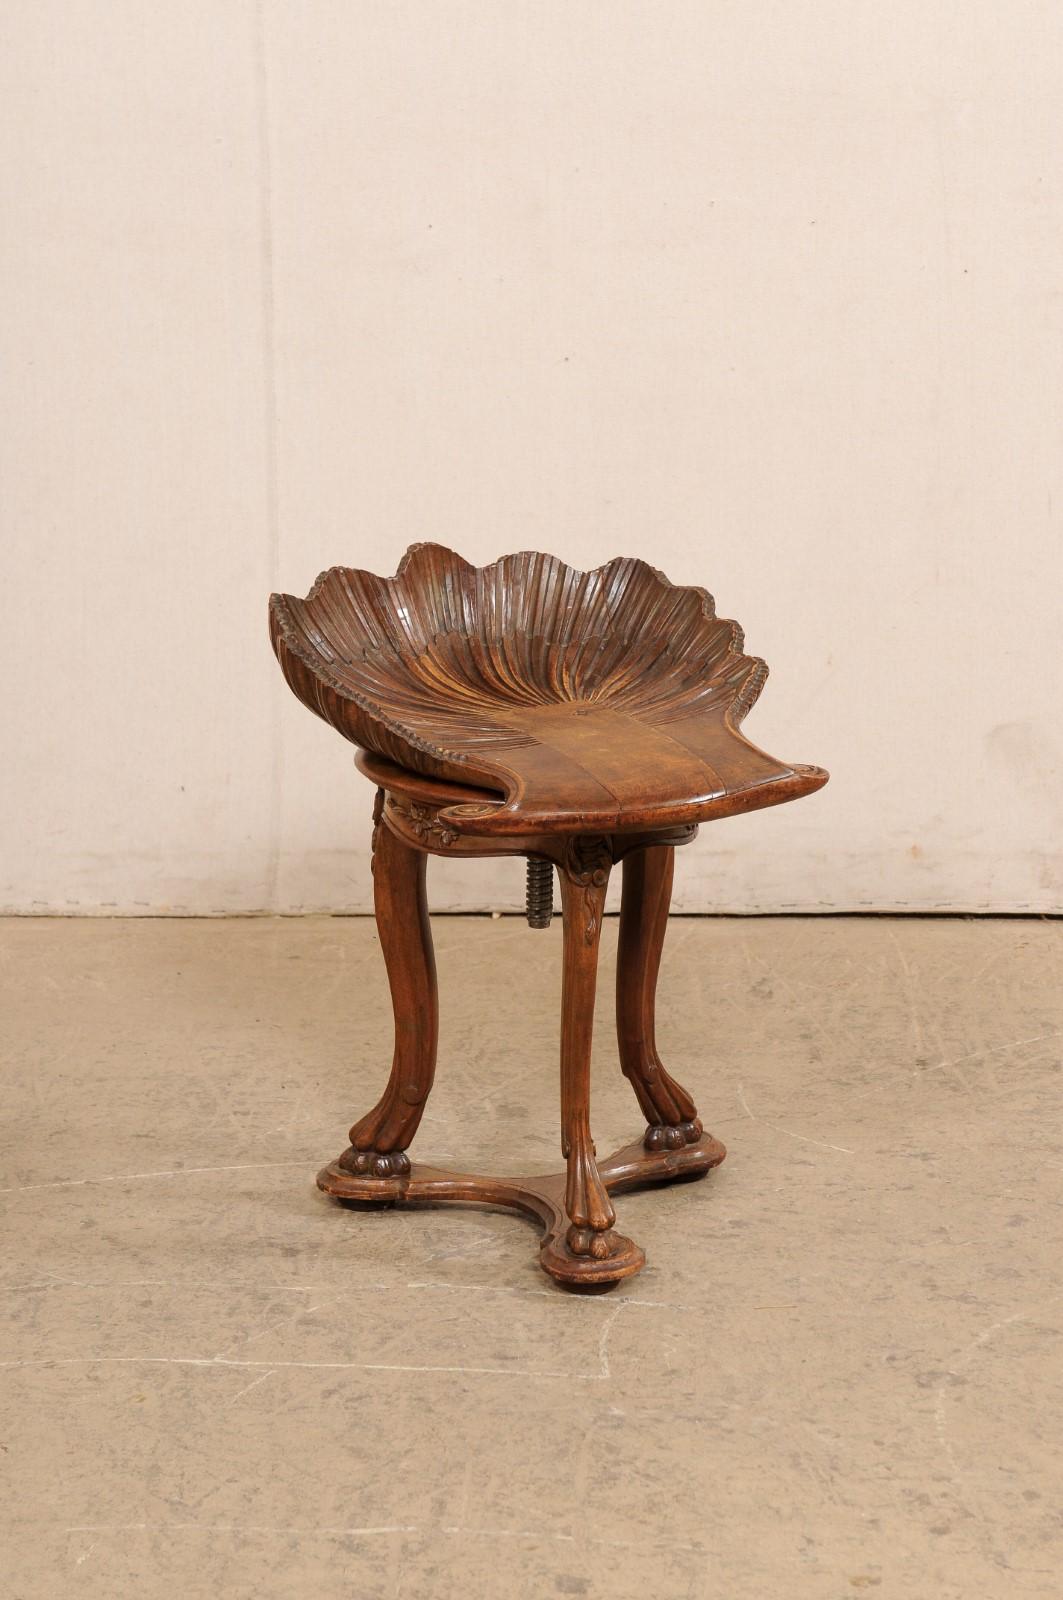 A beautiful Italian Venetian carved-wood grotto chair, with adjustable height, from the turn of the 19th and 20th century. This antique bench from Italy features a fruitwood carved-clam shell seat, atop a rounded apron with swag skirting and